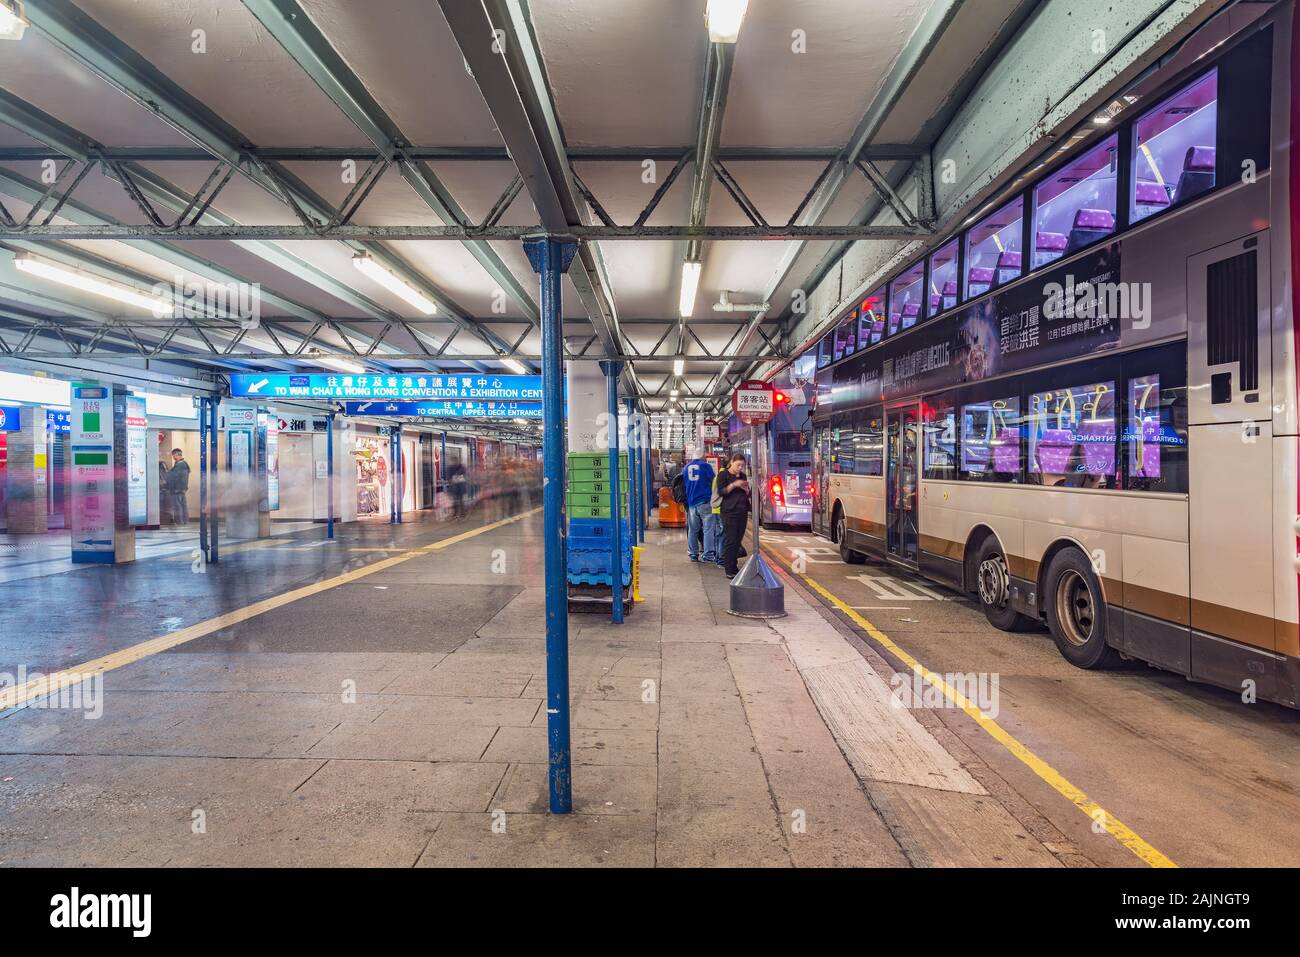 Kowloon, Hong Kong - December 11, 2016: Buses stand by the platforms before departure. Stock Photo